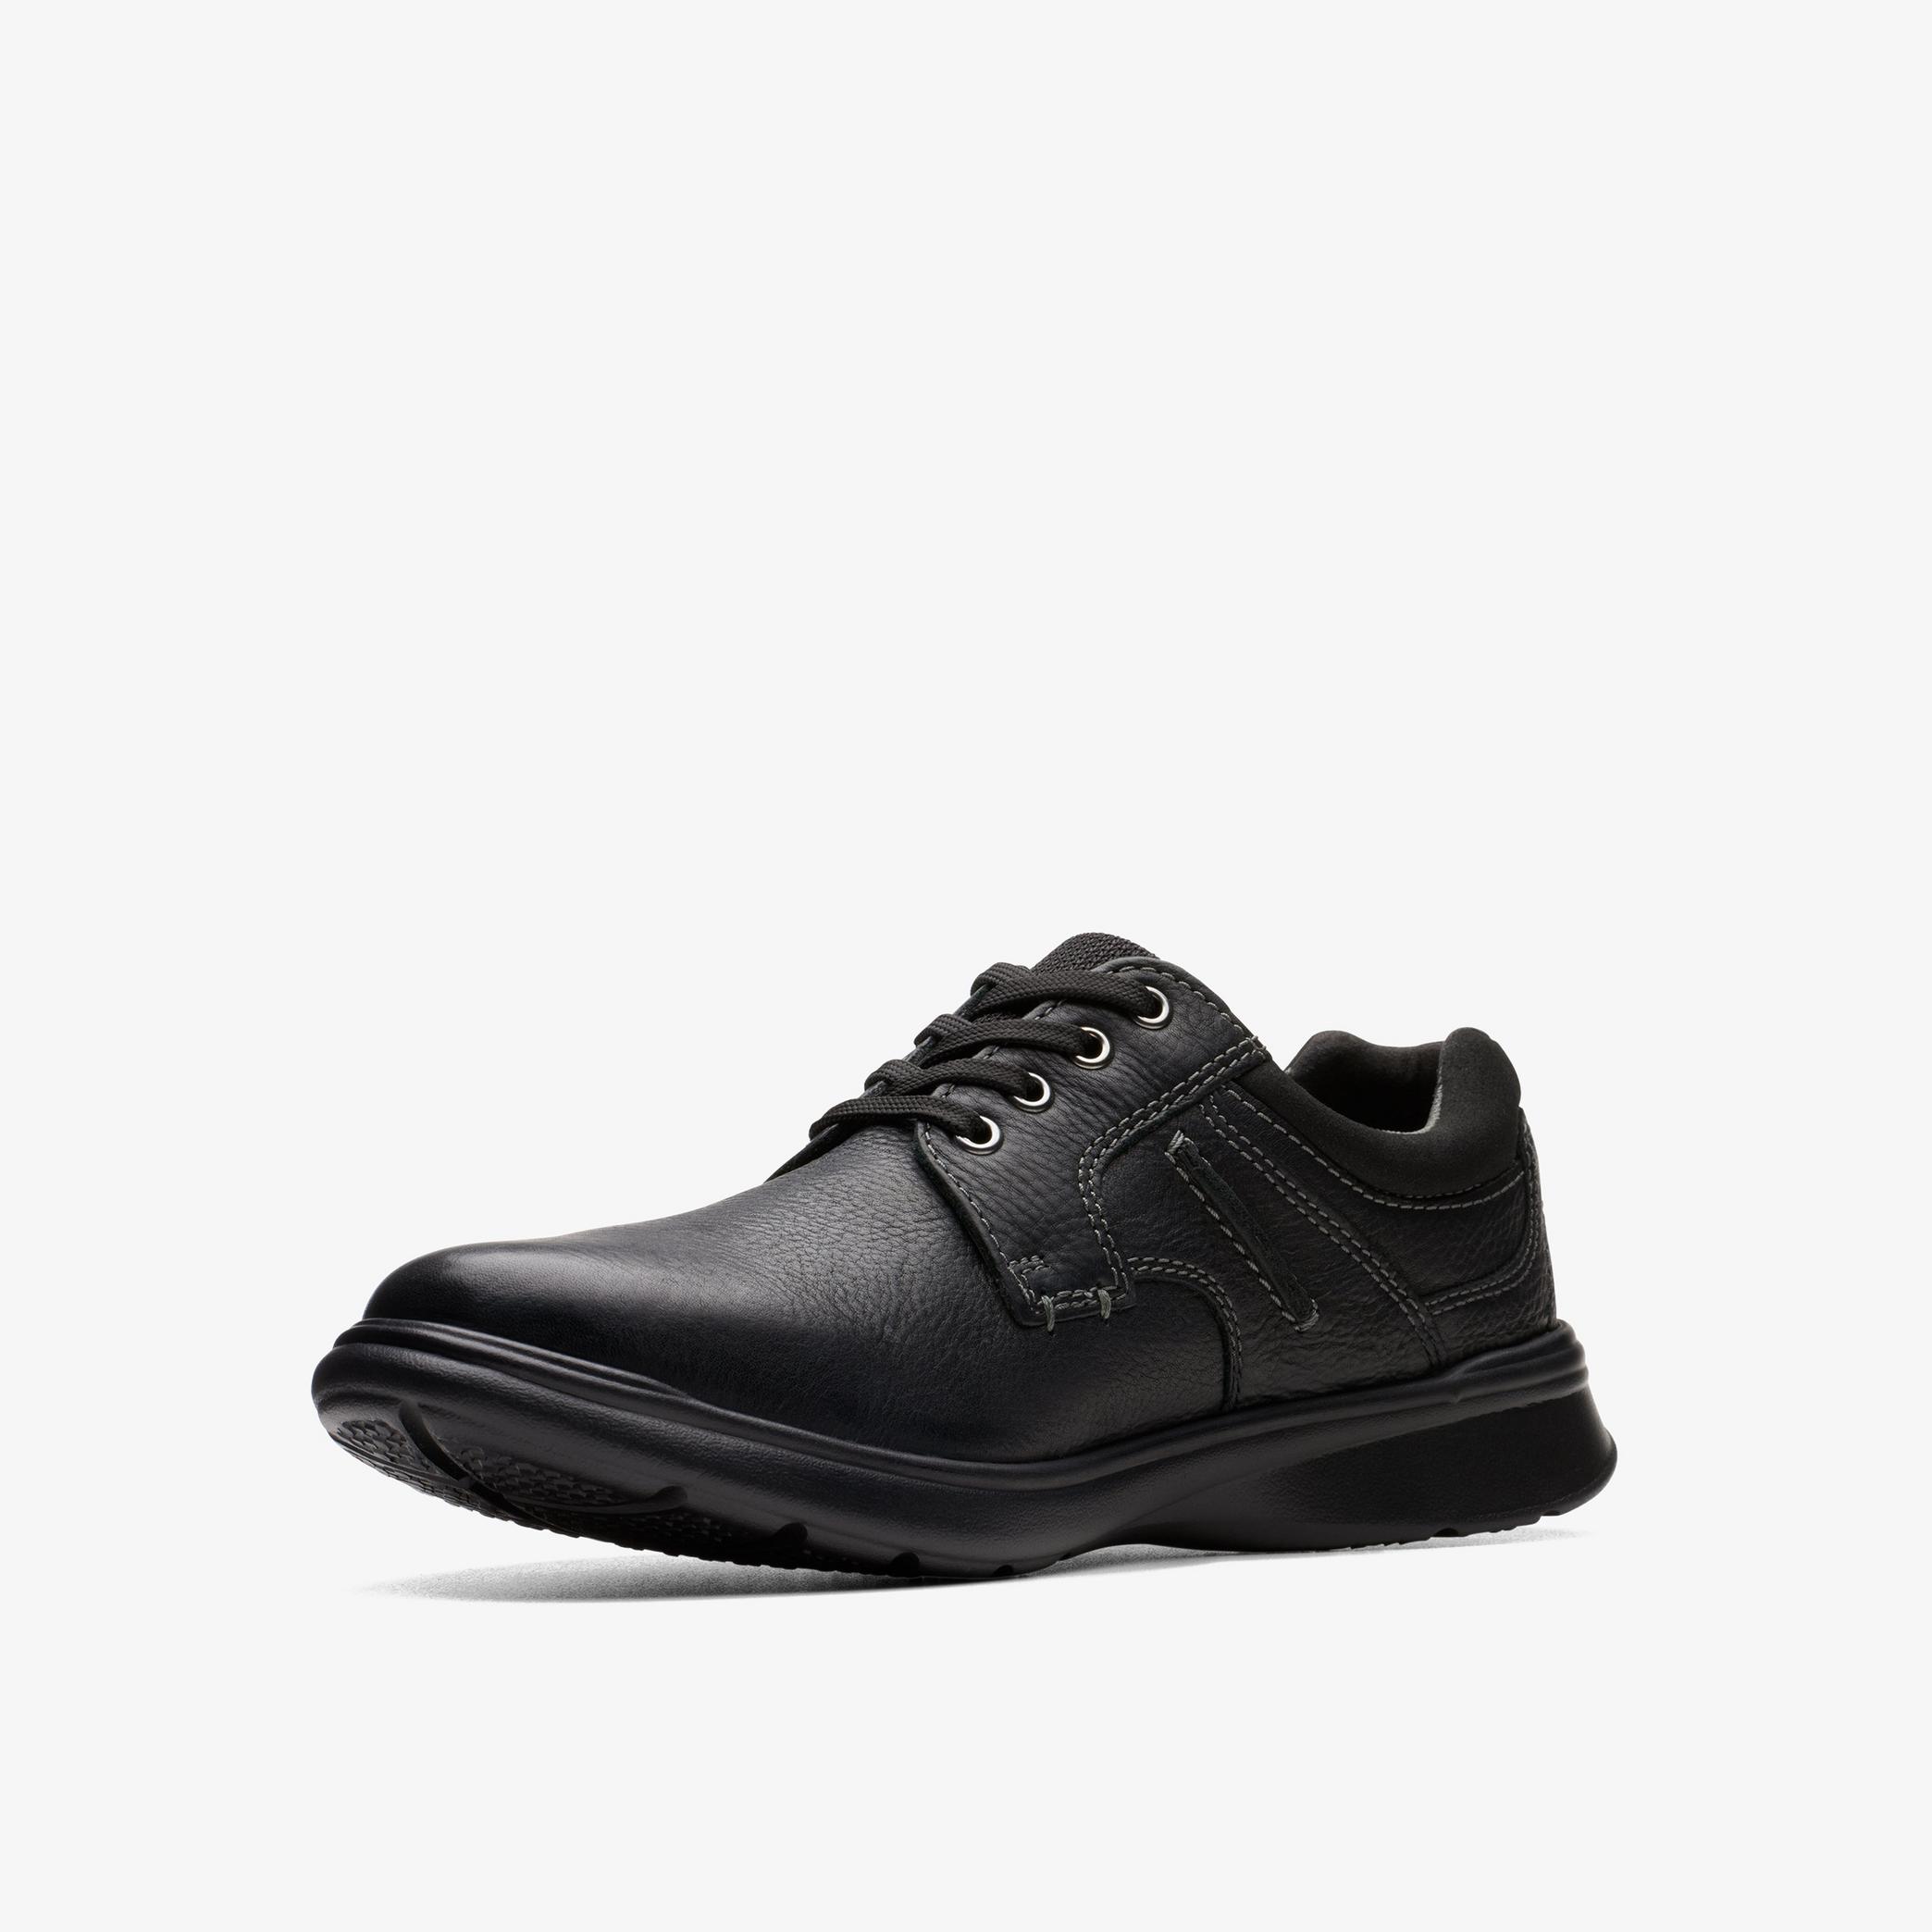 Cotrell Plain Black Oily Leather Shoes, view 4 of 6